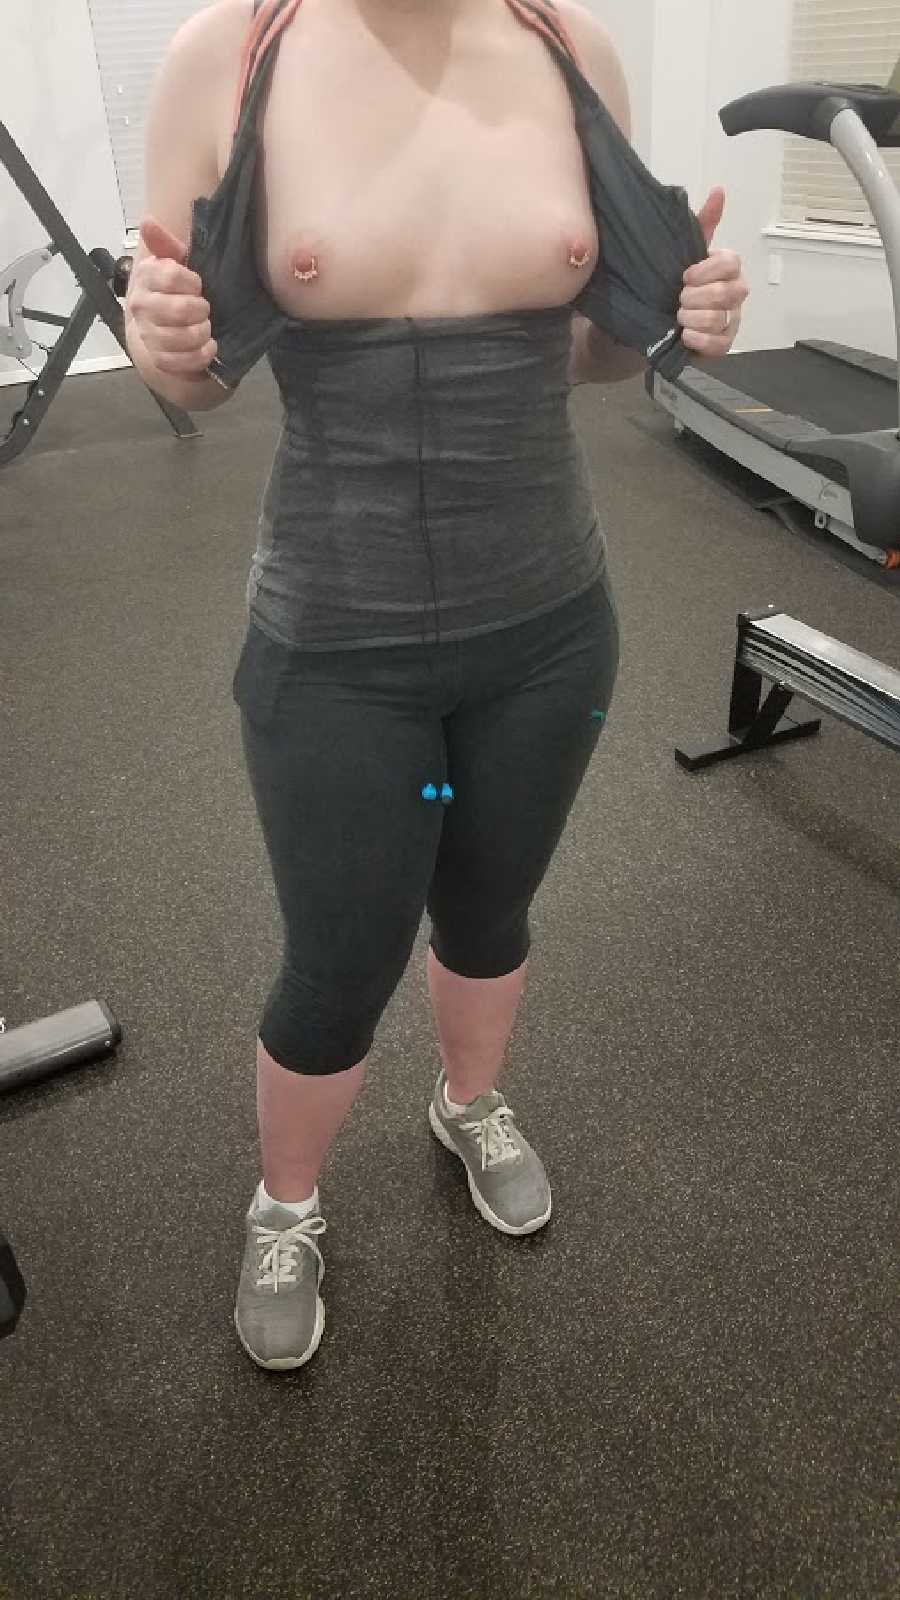 Flashing at the Hotel Gym